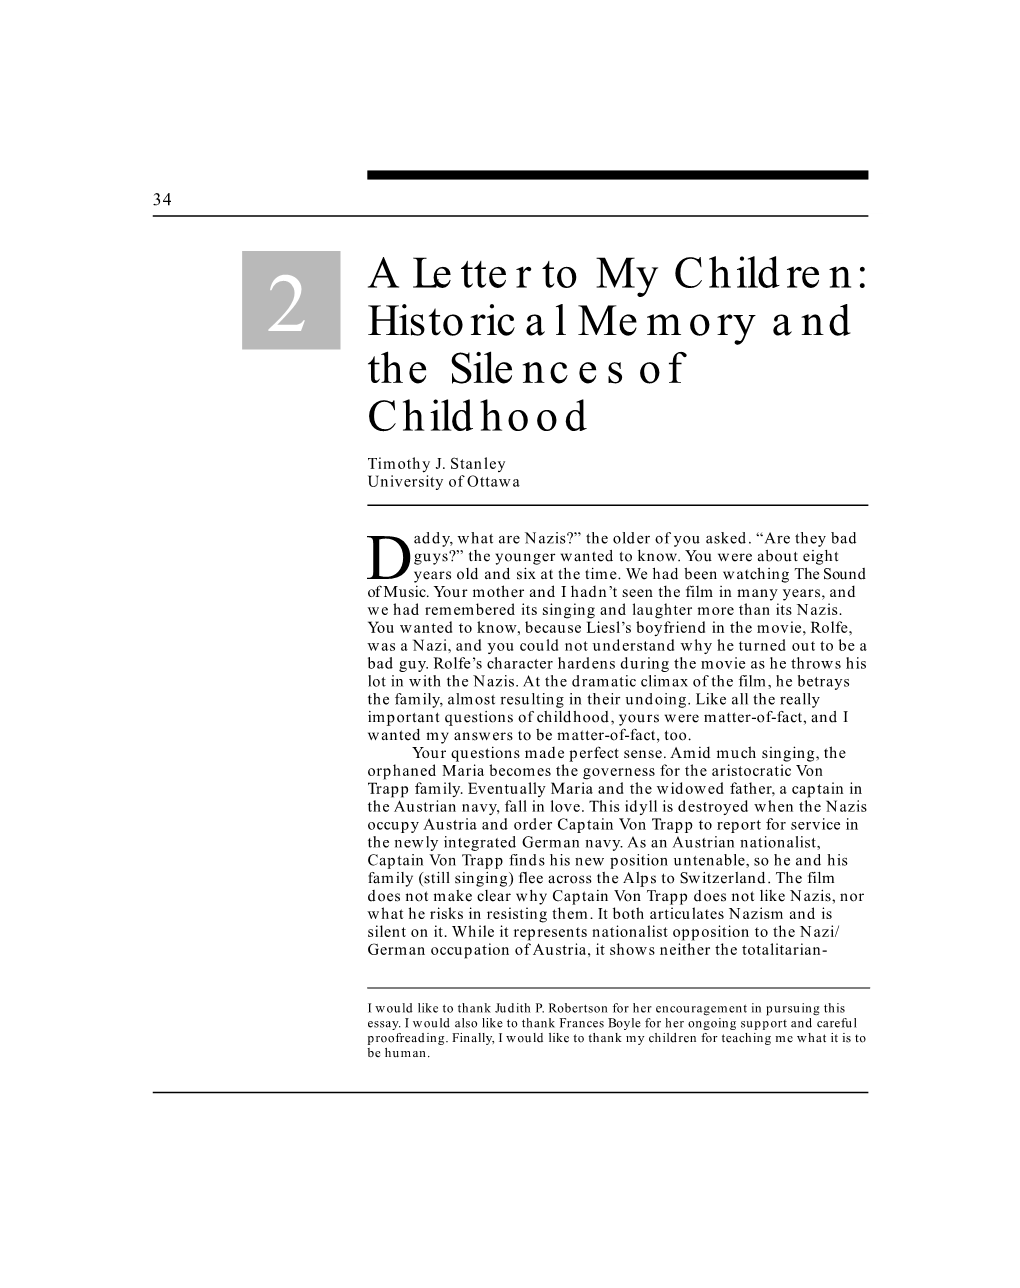 A Letter to My Children: 2 Historical Memory and the Silences of Childhood